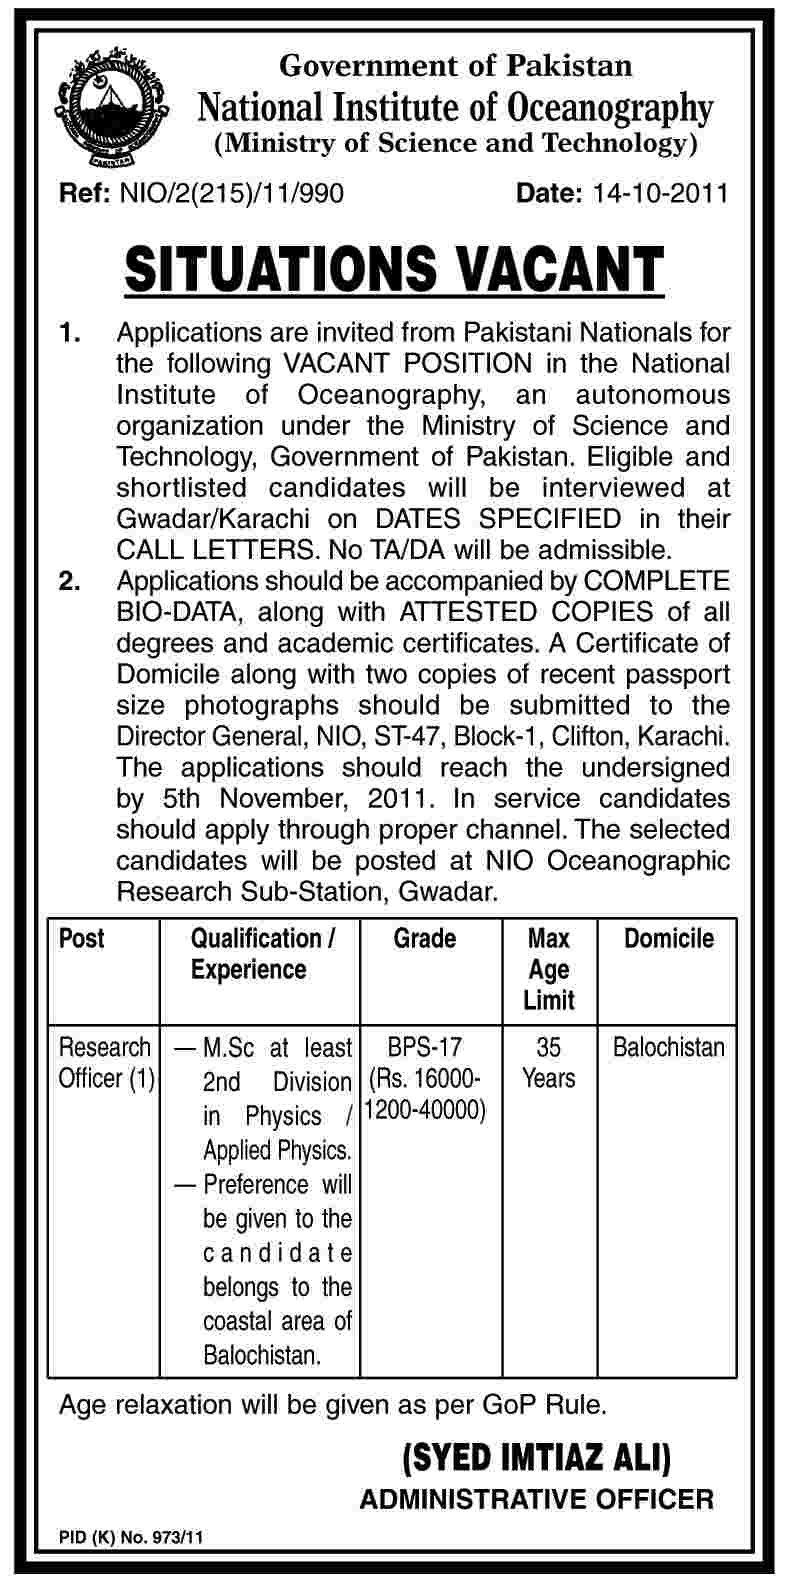 National Institute of Oceanography, Ministry of Science and Technology, Job Opportunity